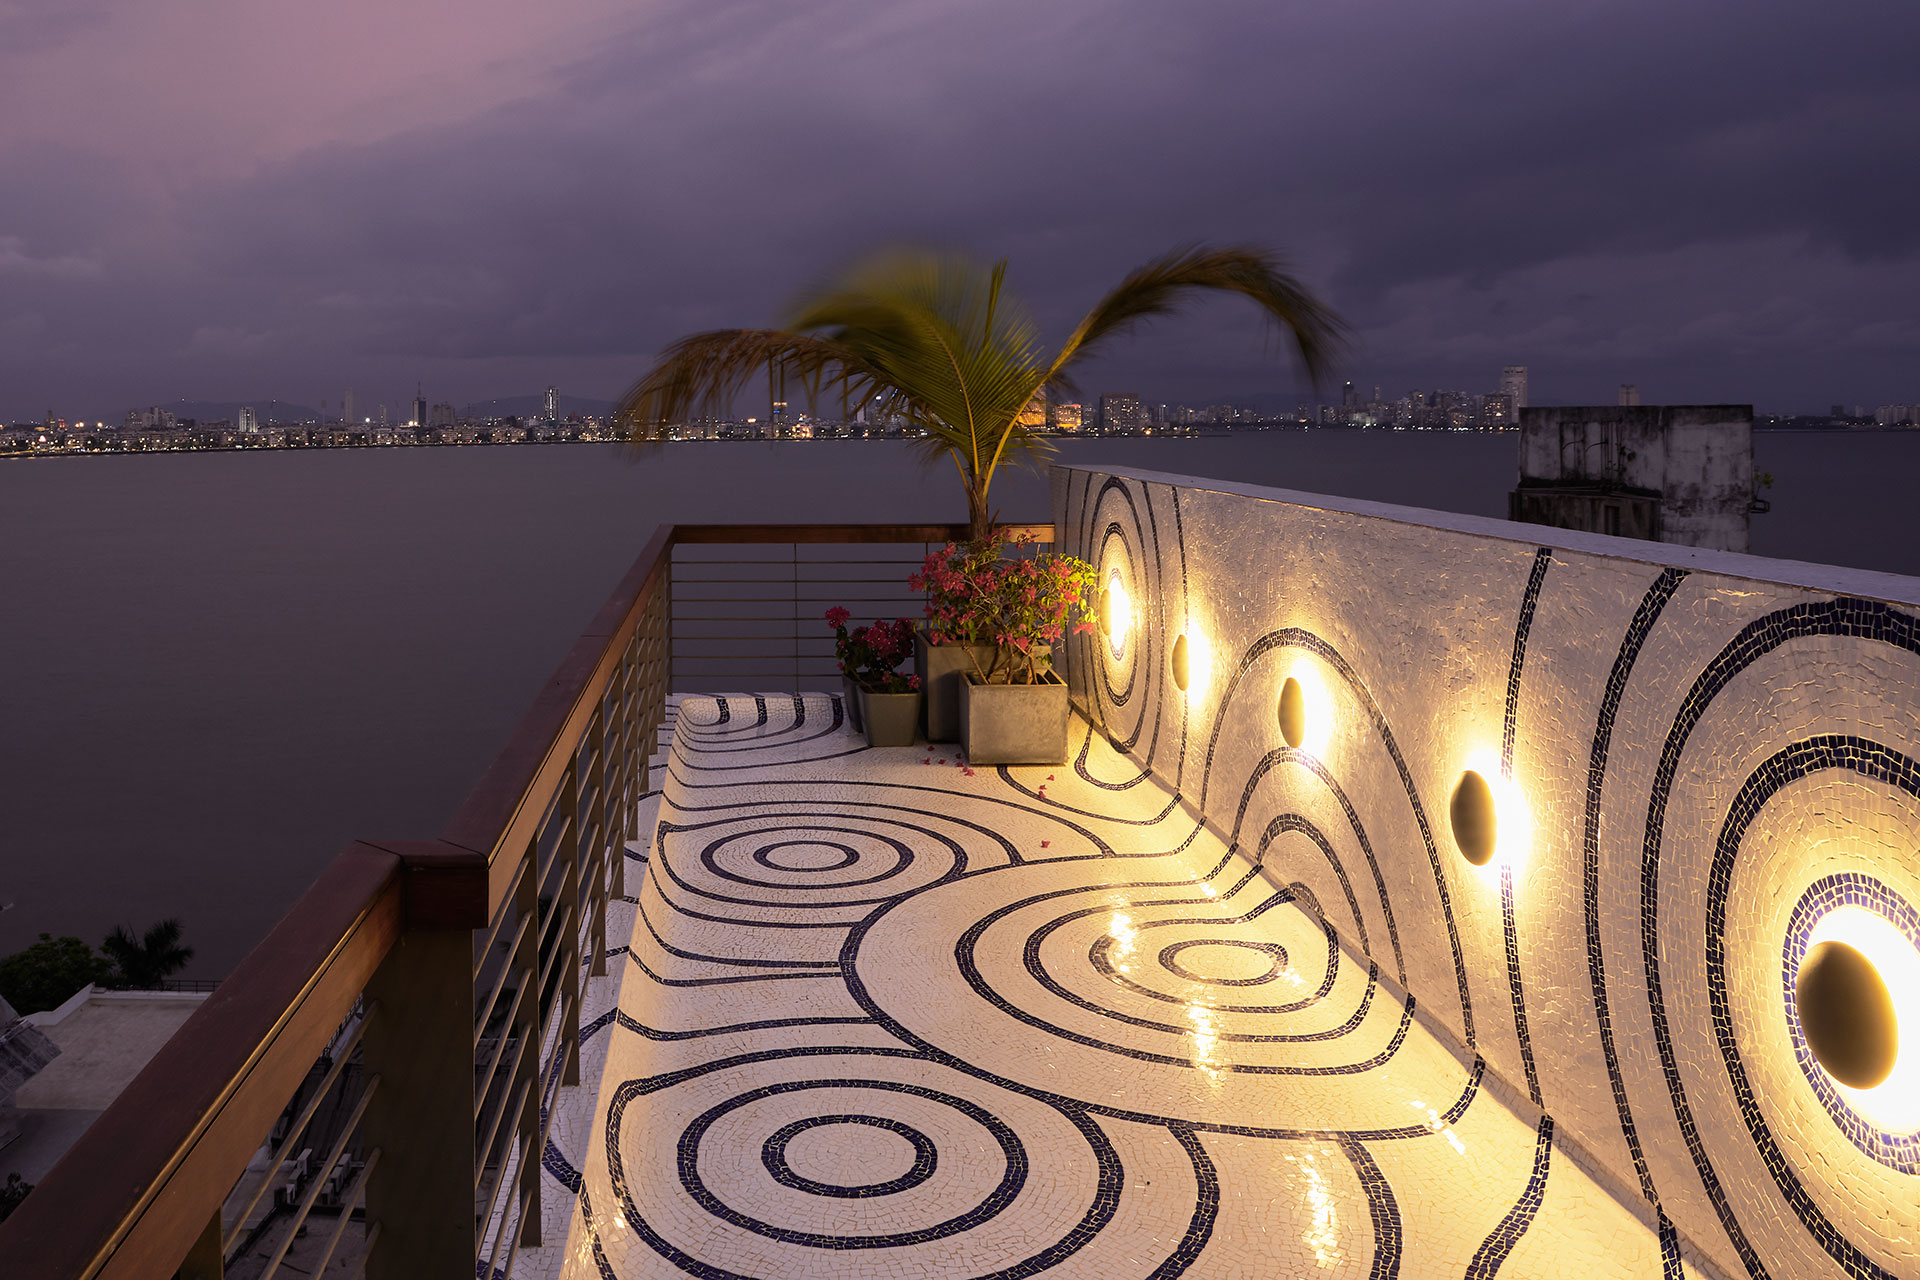 Playful design nuances are also observed as blue ripples in the china chip mosaic for the terraces’ waterproofing.